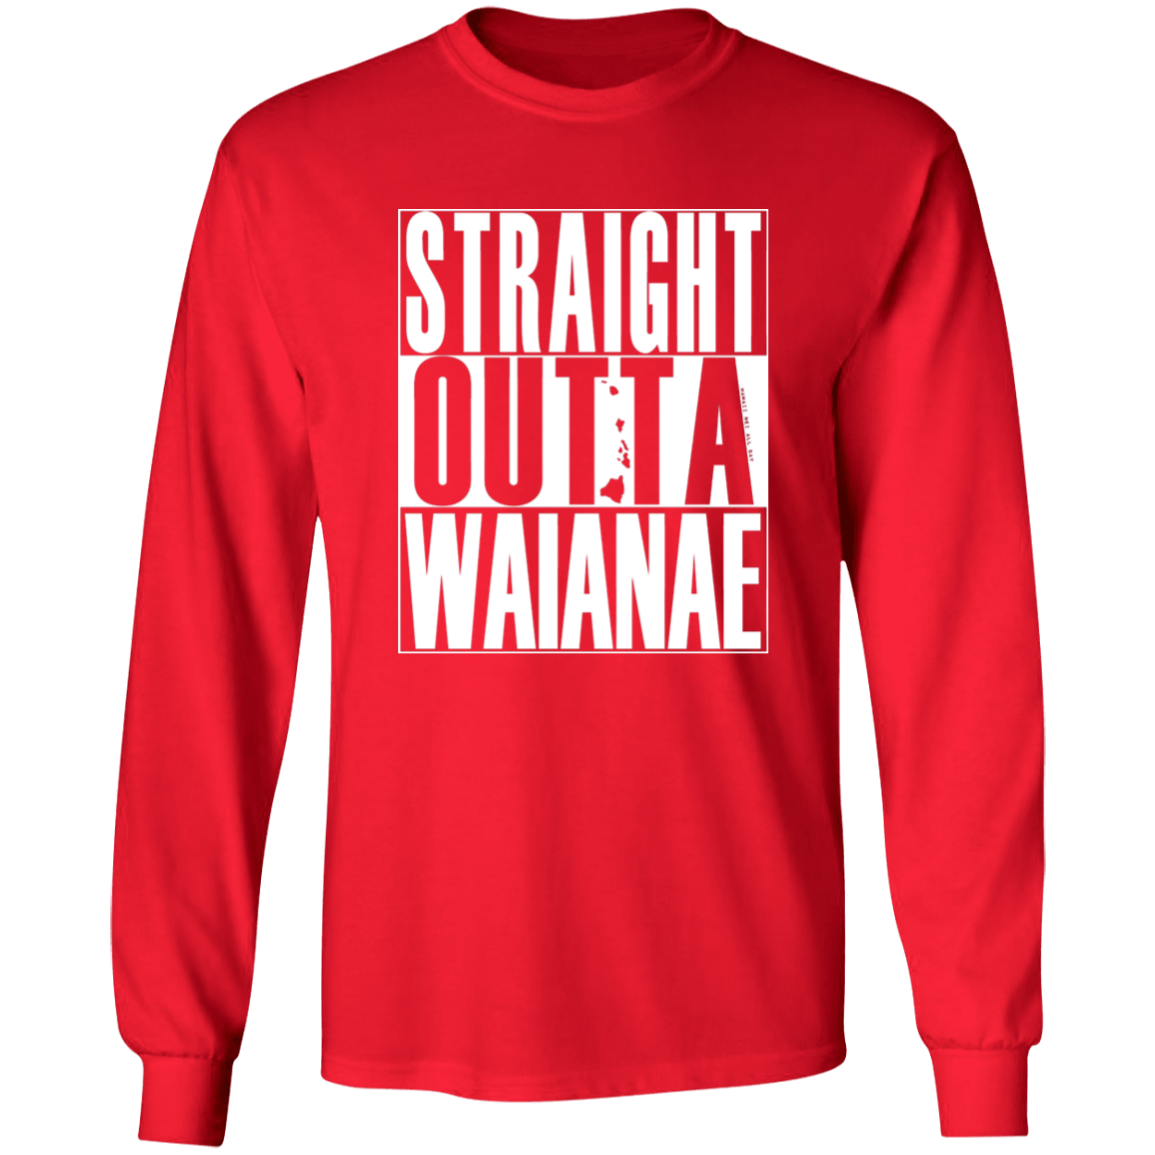 Straight Outta Waianae (white ink)  LS T-Shirt